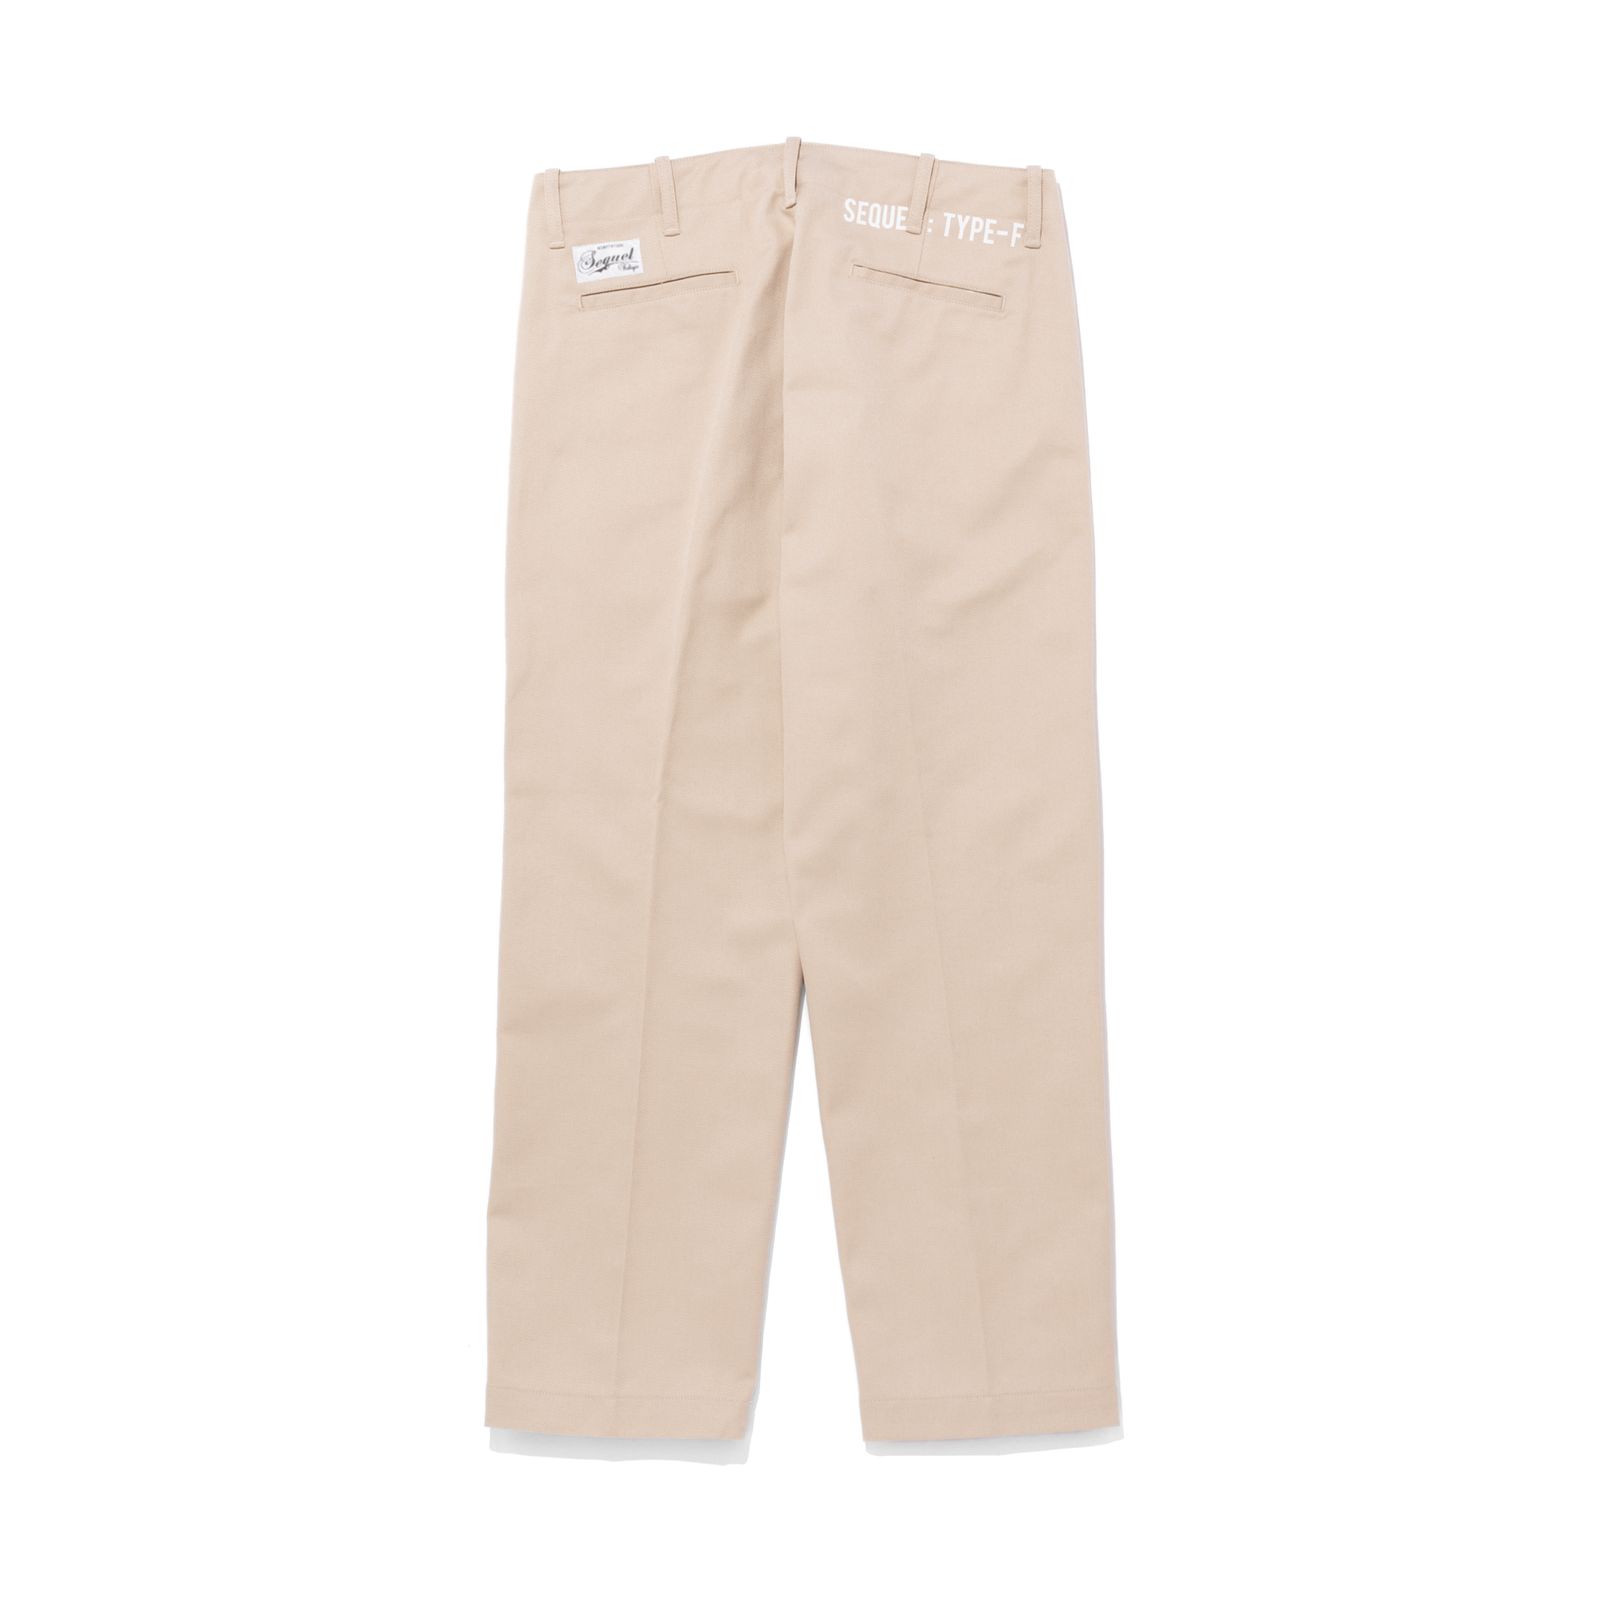 SEQUEL - SQ-23AW-PT-07 CHINO PANTS (TYPE-F) GRAY | River